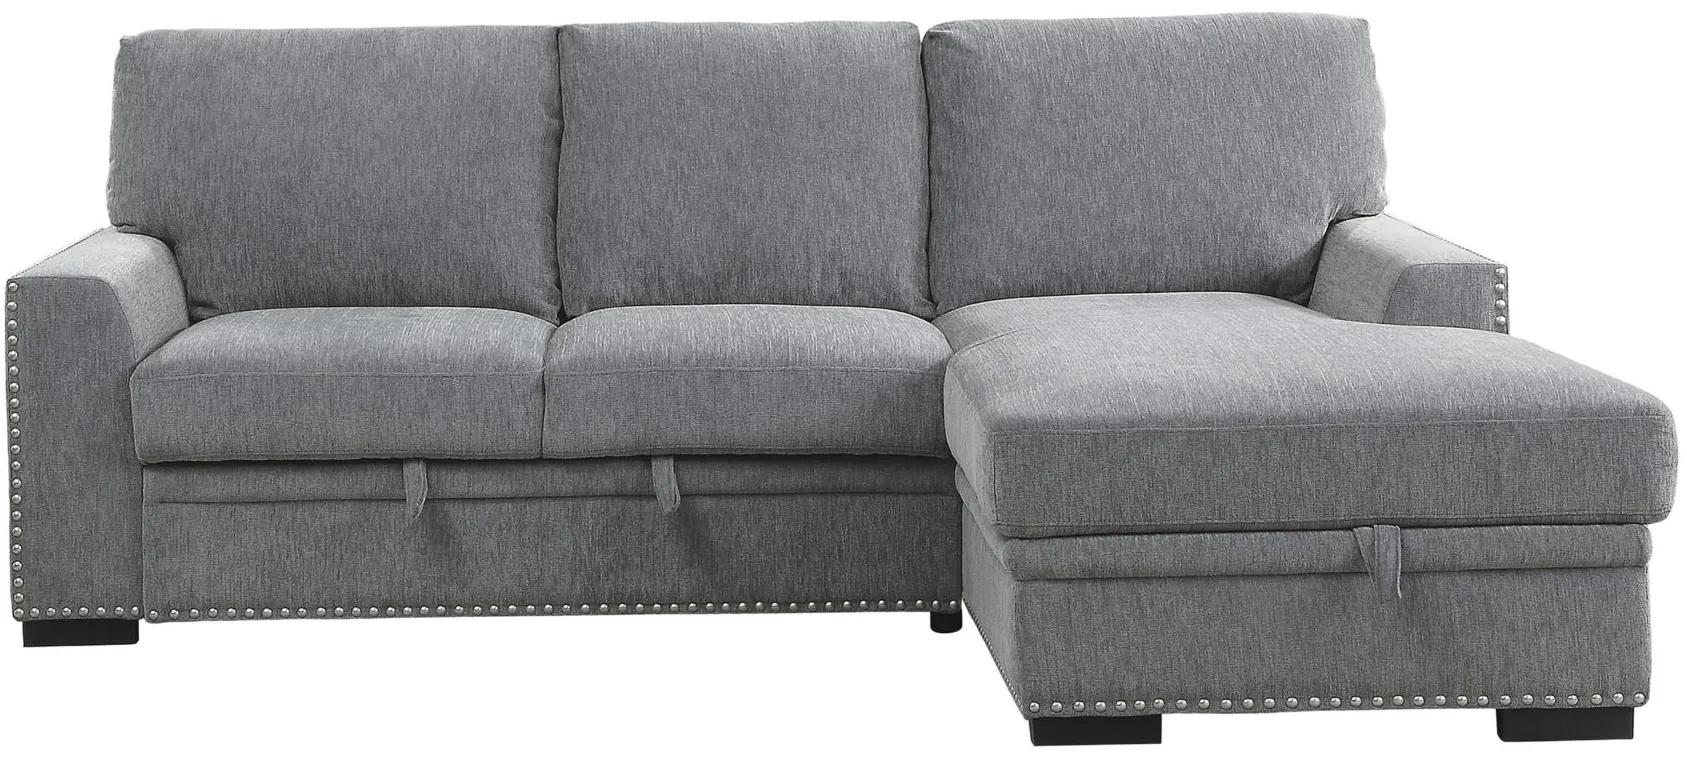 Adelia 2-pc. Right Facing Sectional with Pull-out Bed in Gray by Homelegance